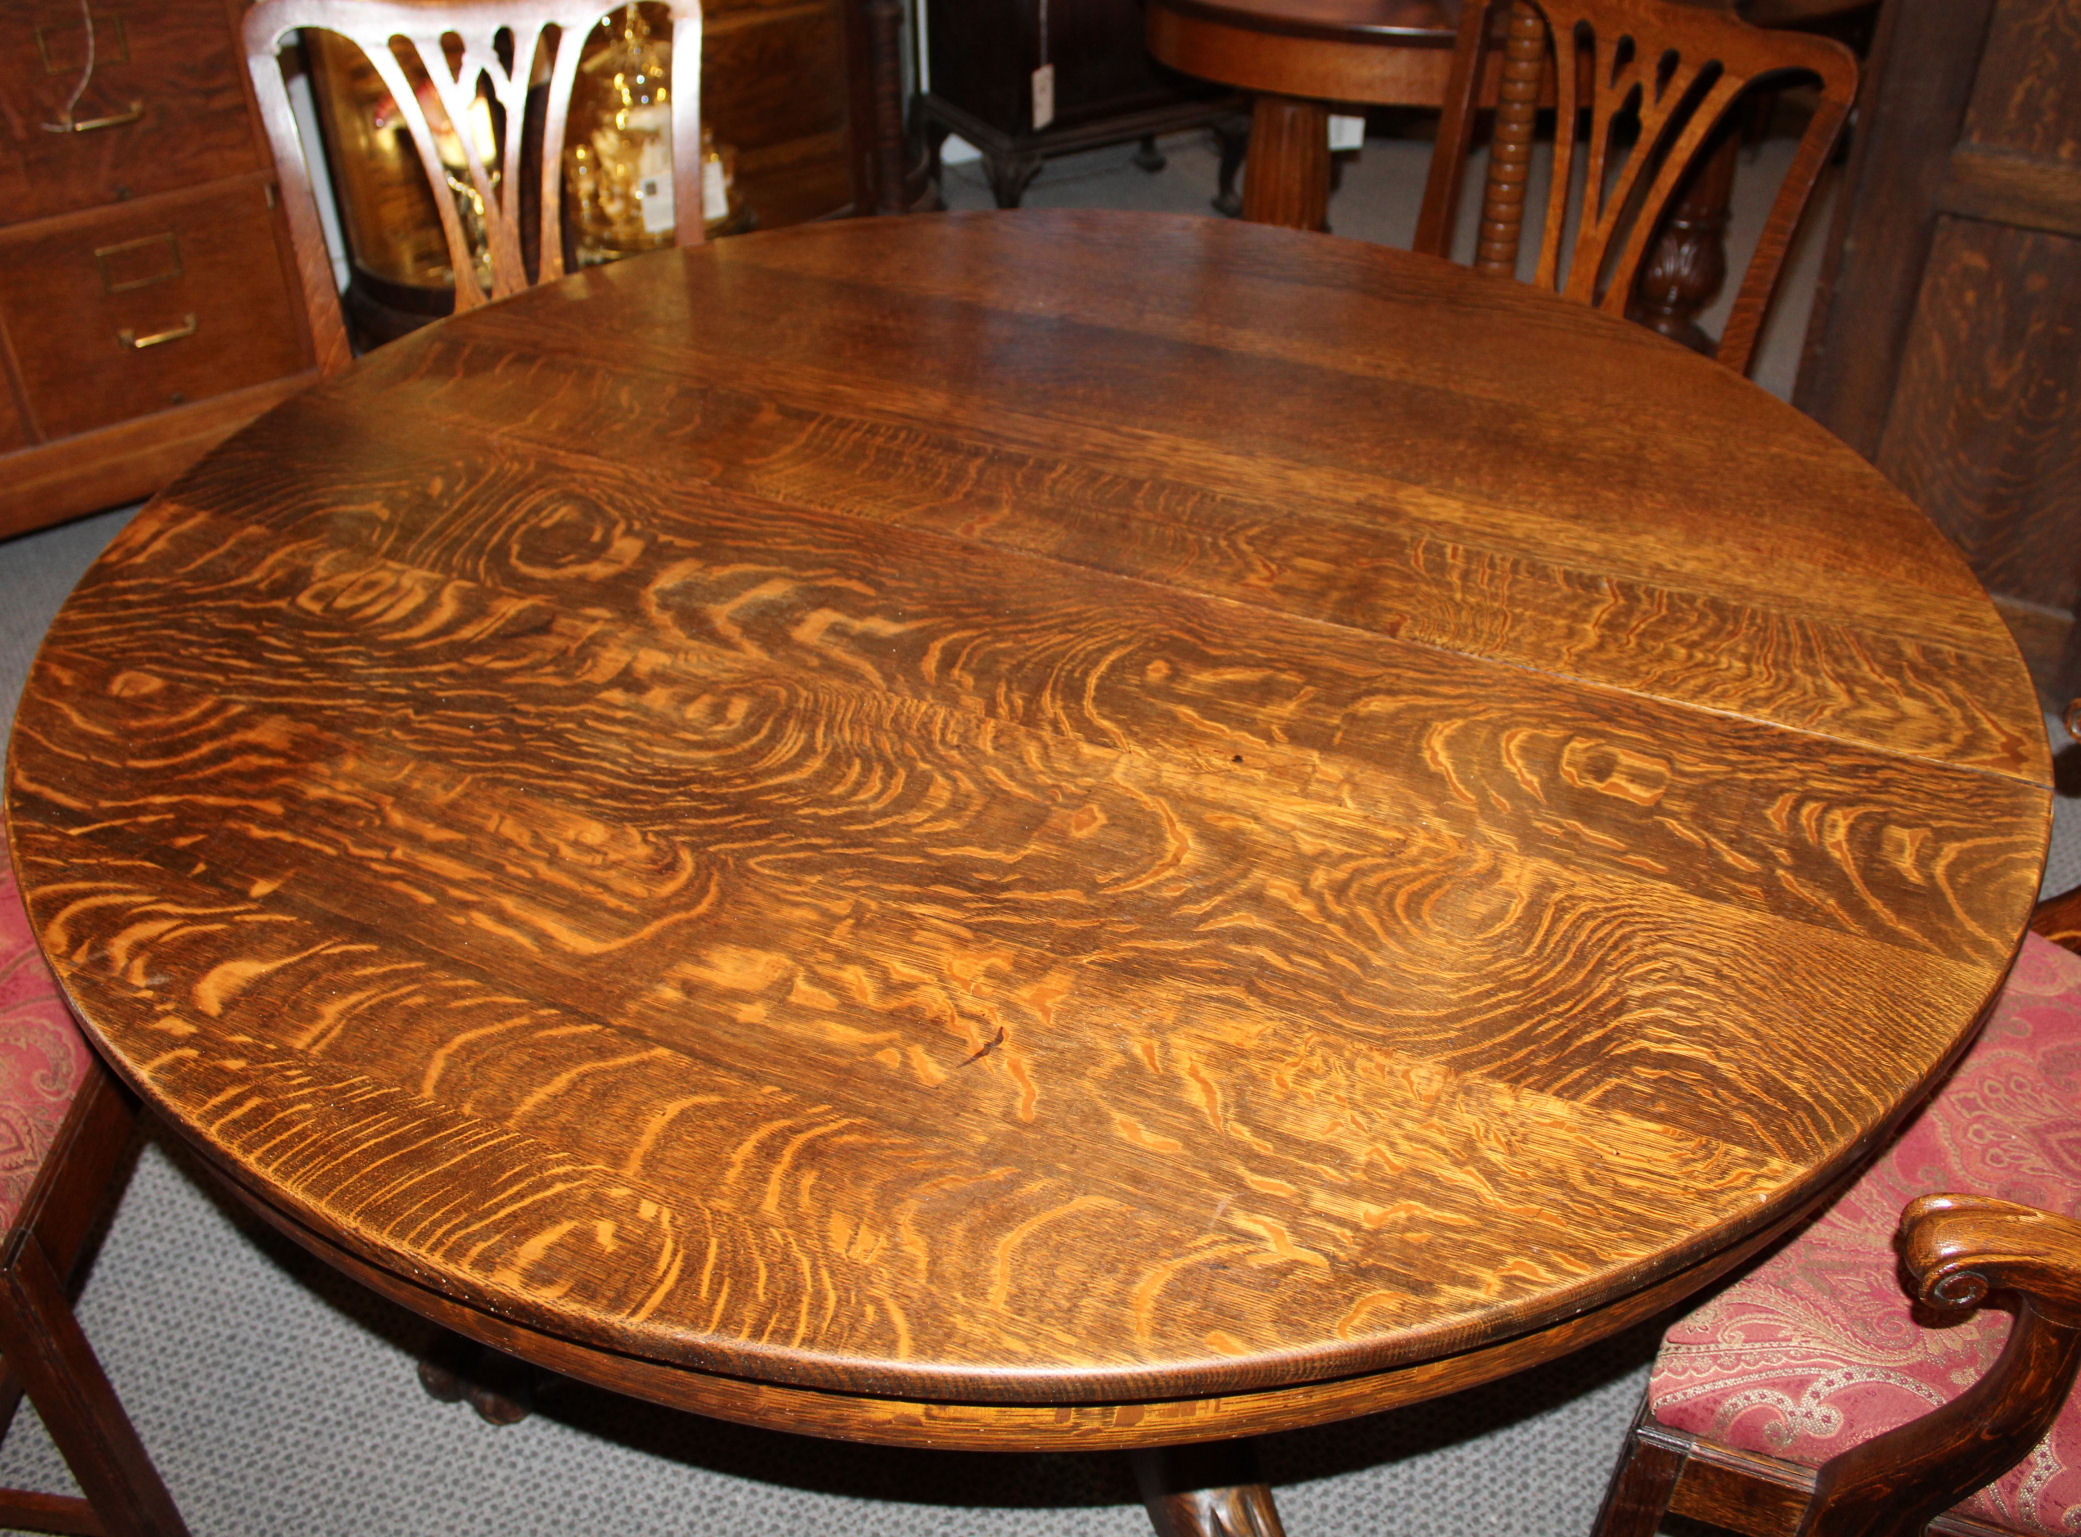 Bargain John's Antiques   Antique Round Oak Dining Table   carved ...